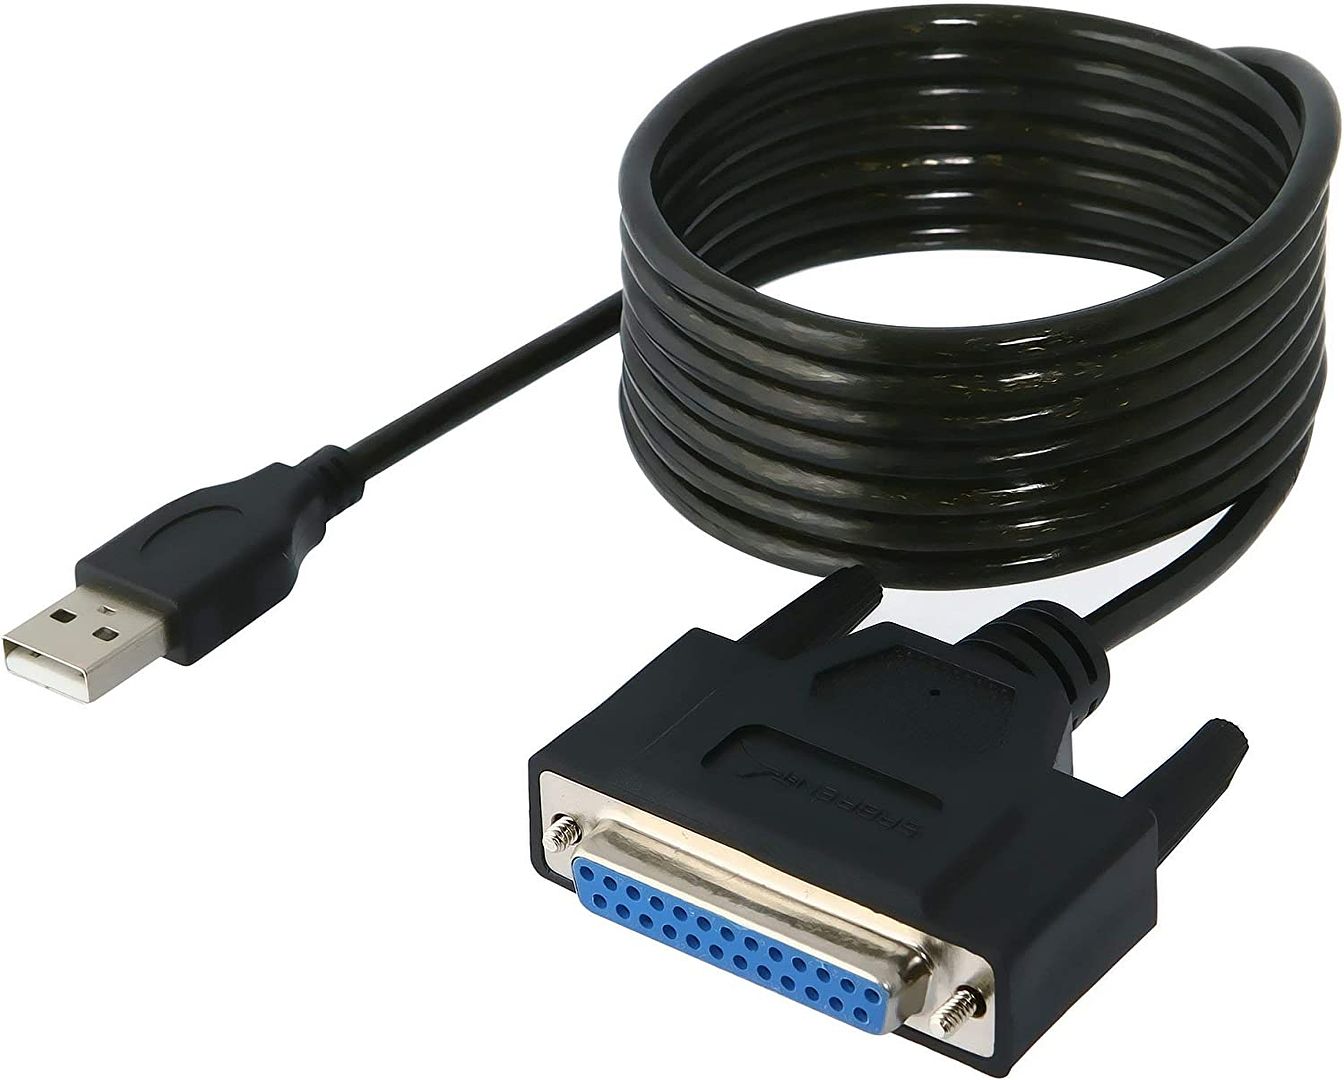 SABRENT USB 2.0 to DB25 IEEE-1284 Parallel Printer Cable Adapter [THUMBSCREWS Connectors] (CB-DB25)